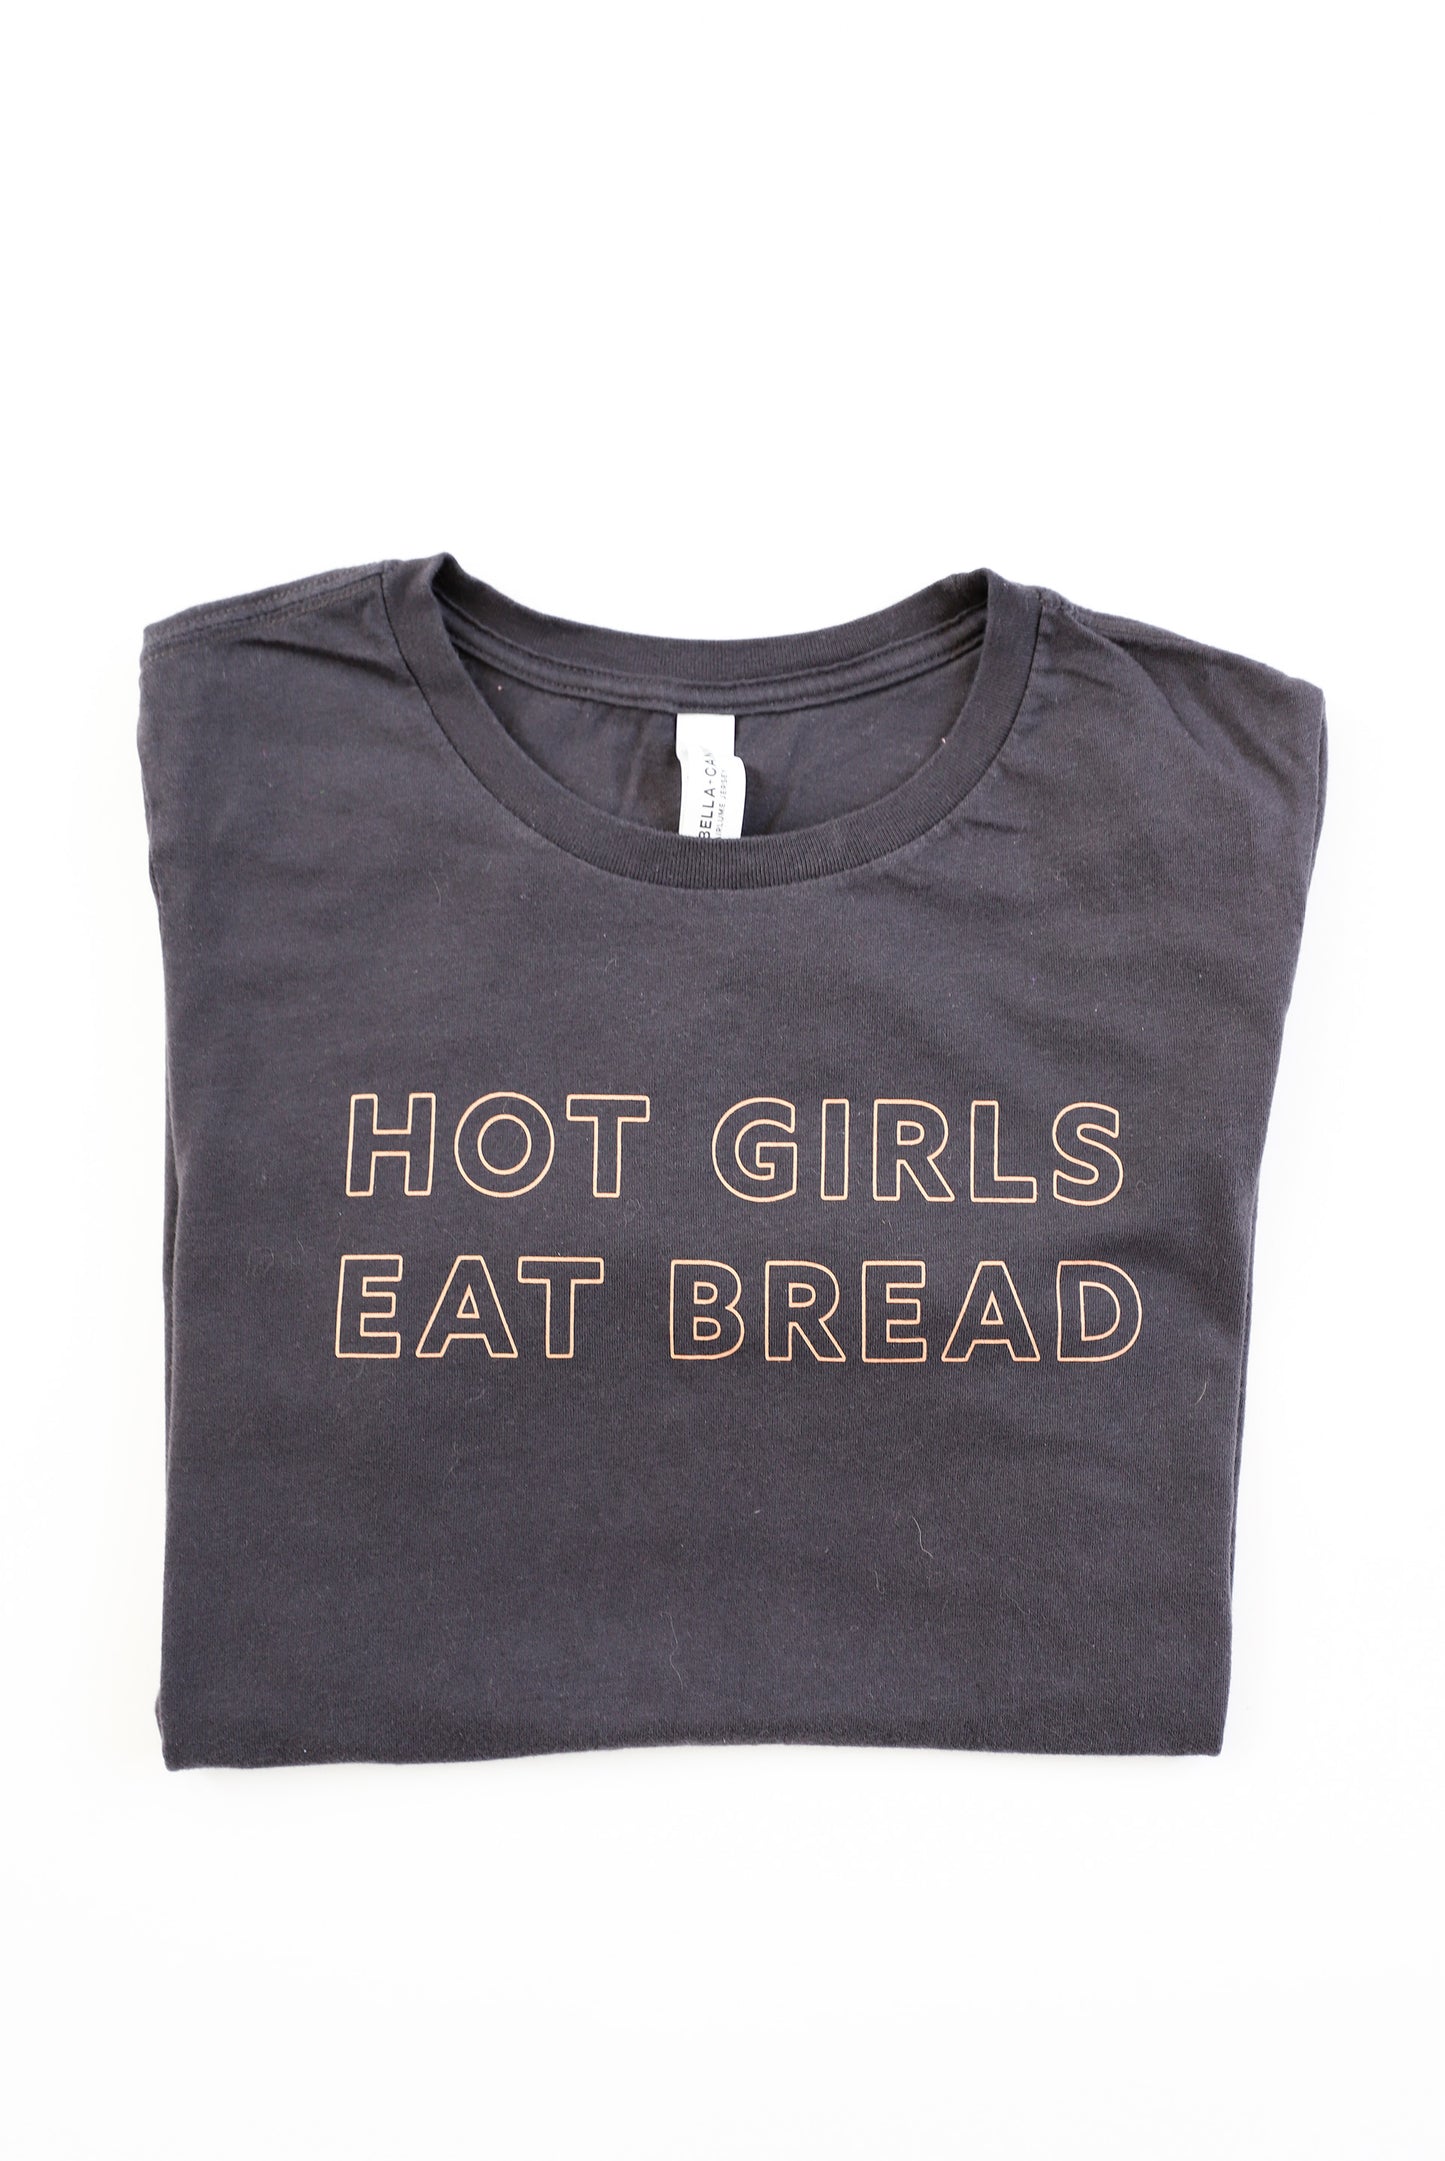 A folded dark grey t-shirt with the words Hot Girls Eat Bread and light pink letters